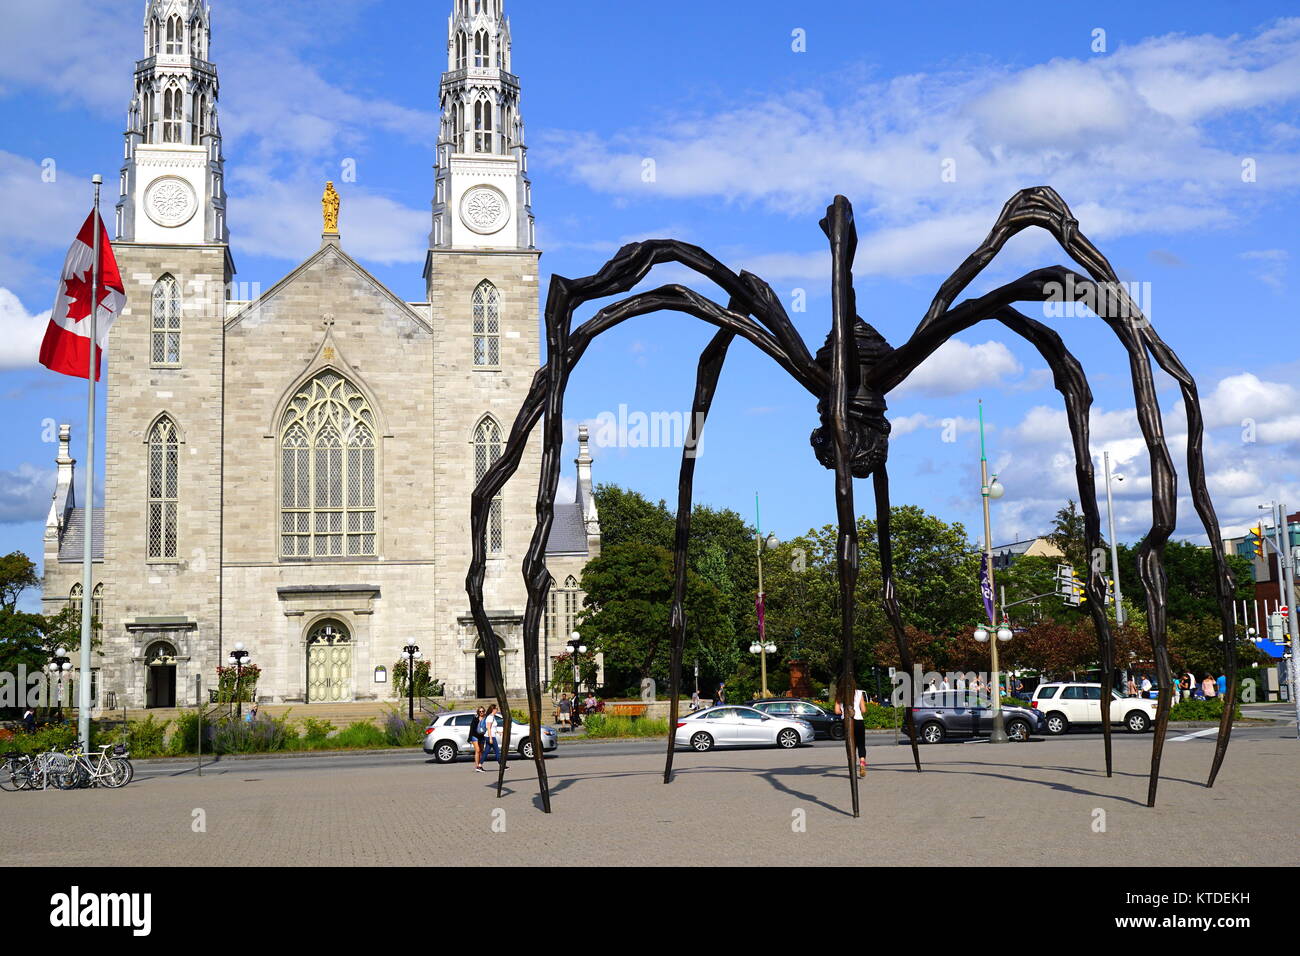 Maman, a bronze, stainless steel, and marble giant spider sculpture by the artist Louise Bourgeois at the National Art Gallery Ottawa, Ontario, Canada Stock Photo